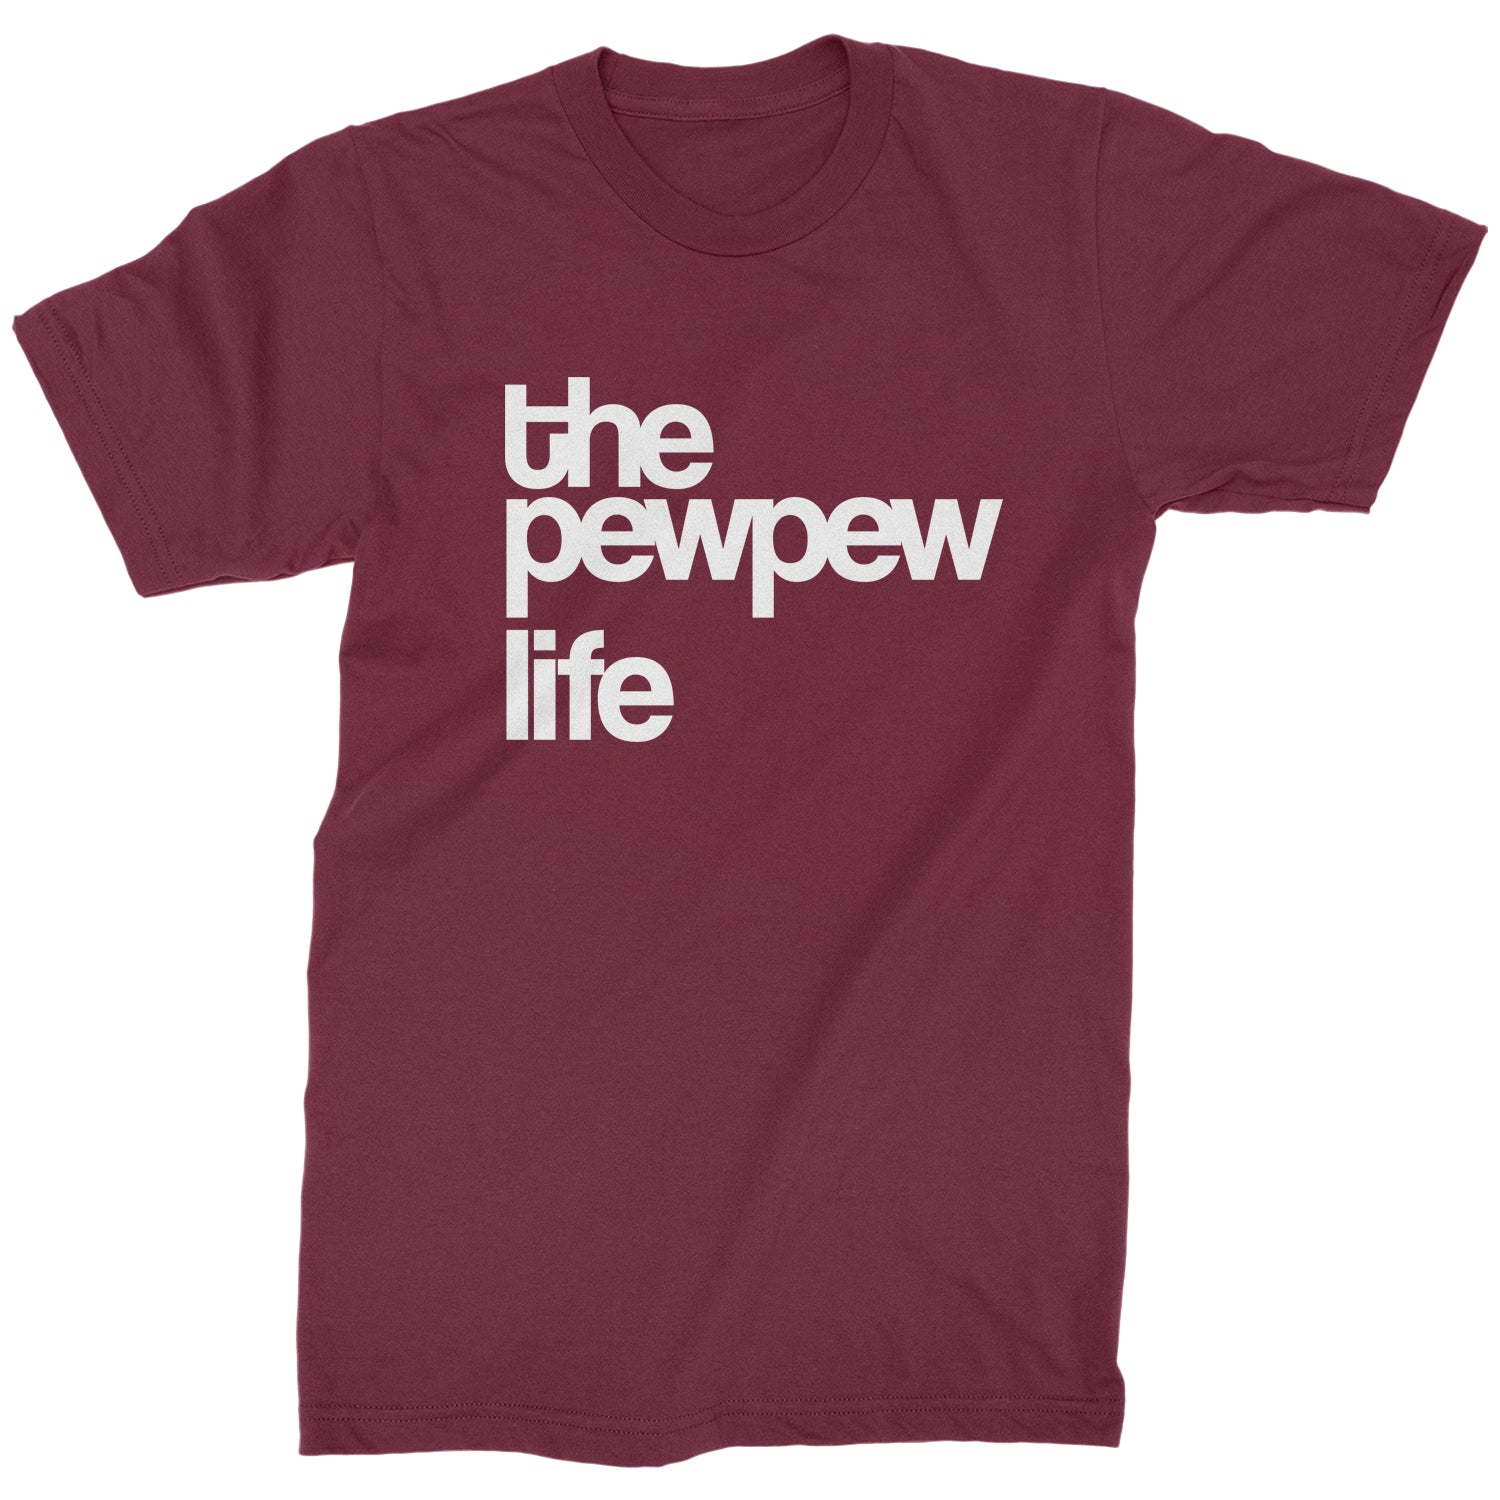 The PewPew Pew Pew Life Gun Rights Mens T-shirt #expressiontees by Expression Tees